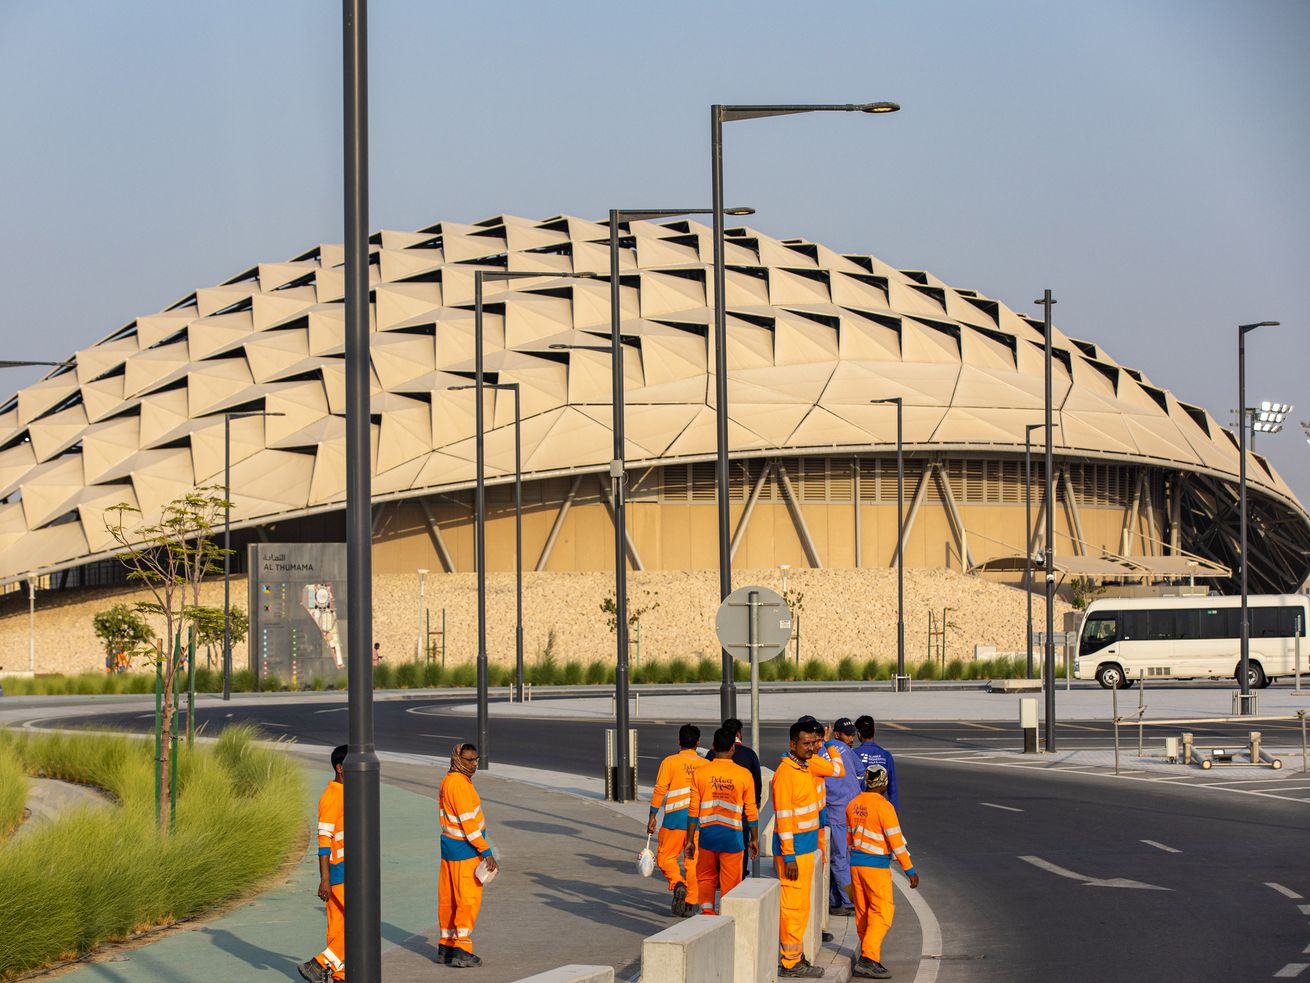 What else Qatar has built with its absurd wealth besides the 2022 World Cup